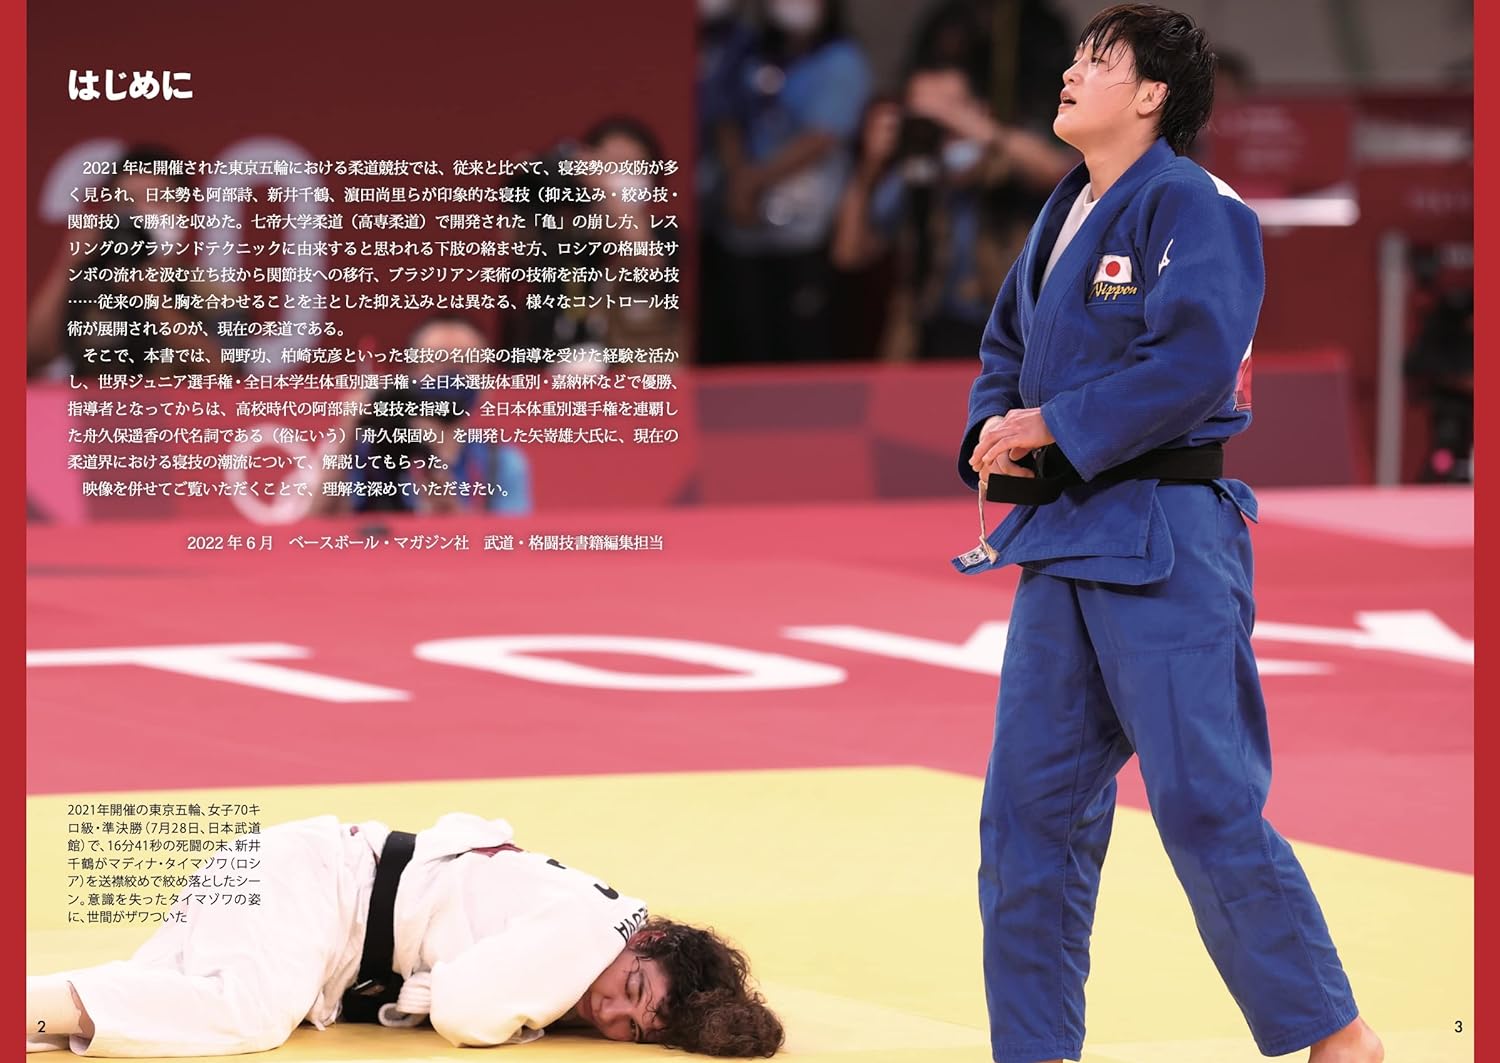 A Completely new Judo Ground Technique Textbook (With QR Codes) by Yudai Yazaki